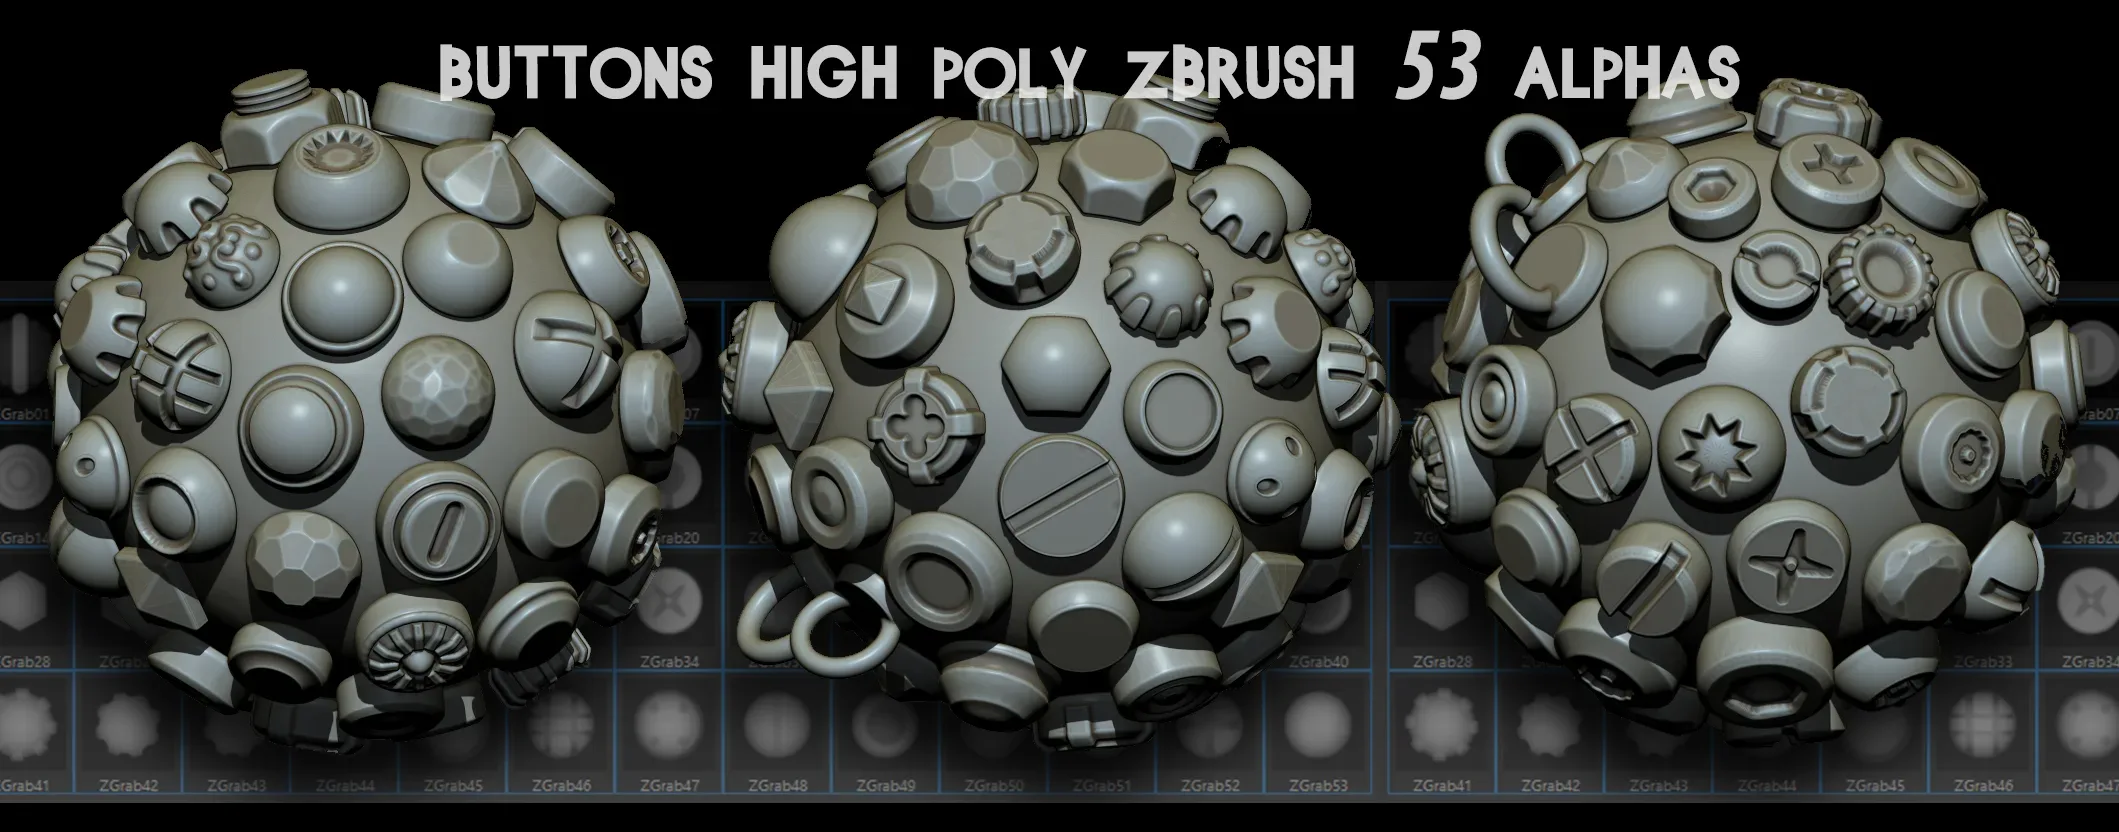 Buttons High Poly Zbrush 53 Alphas